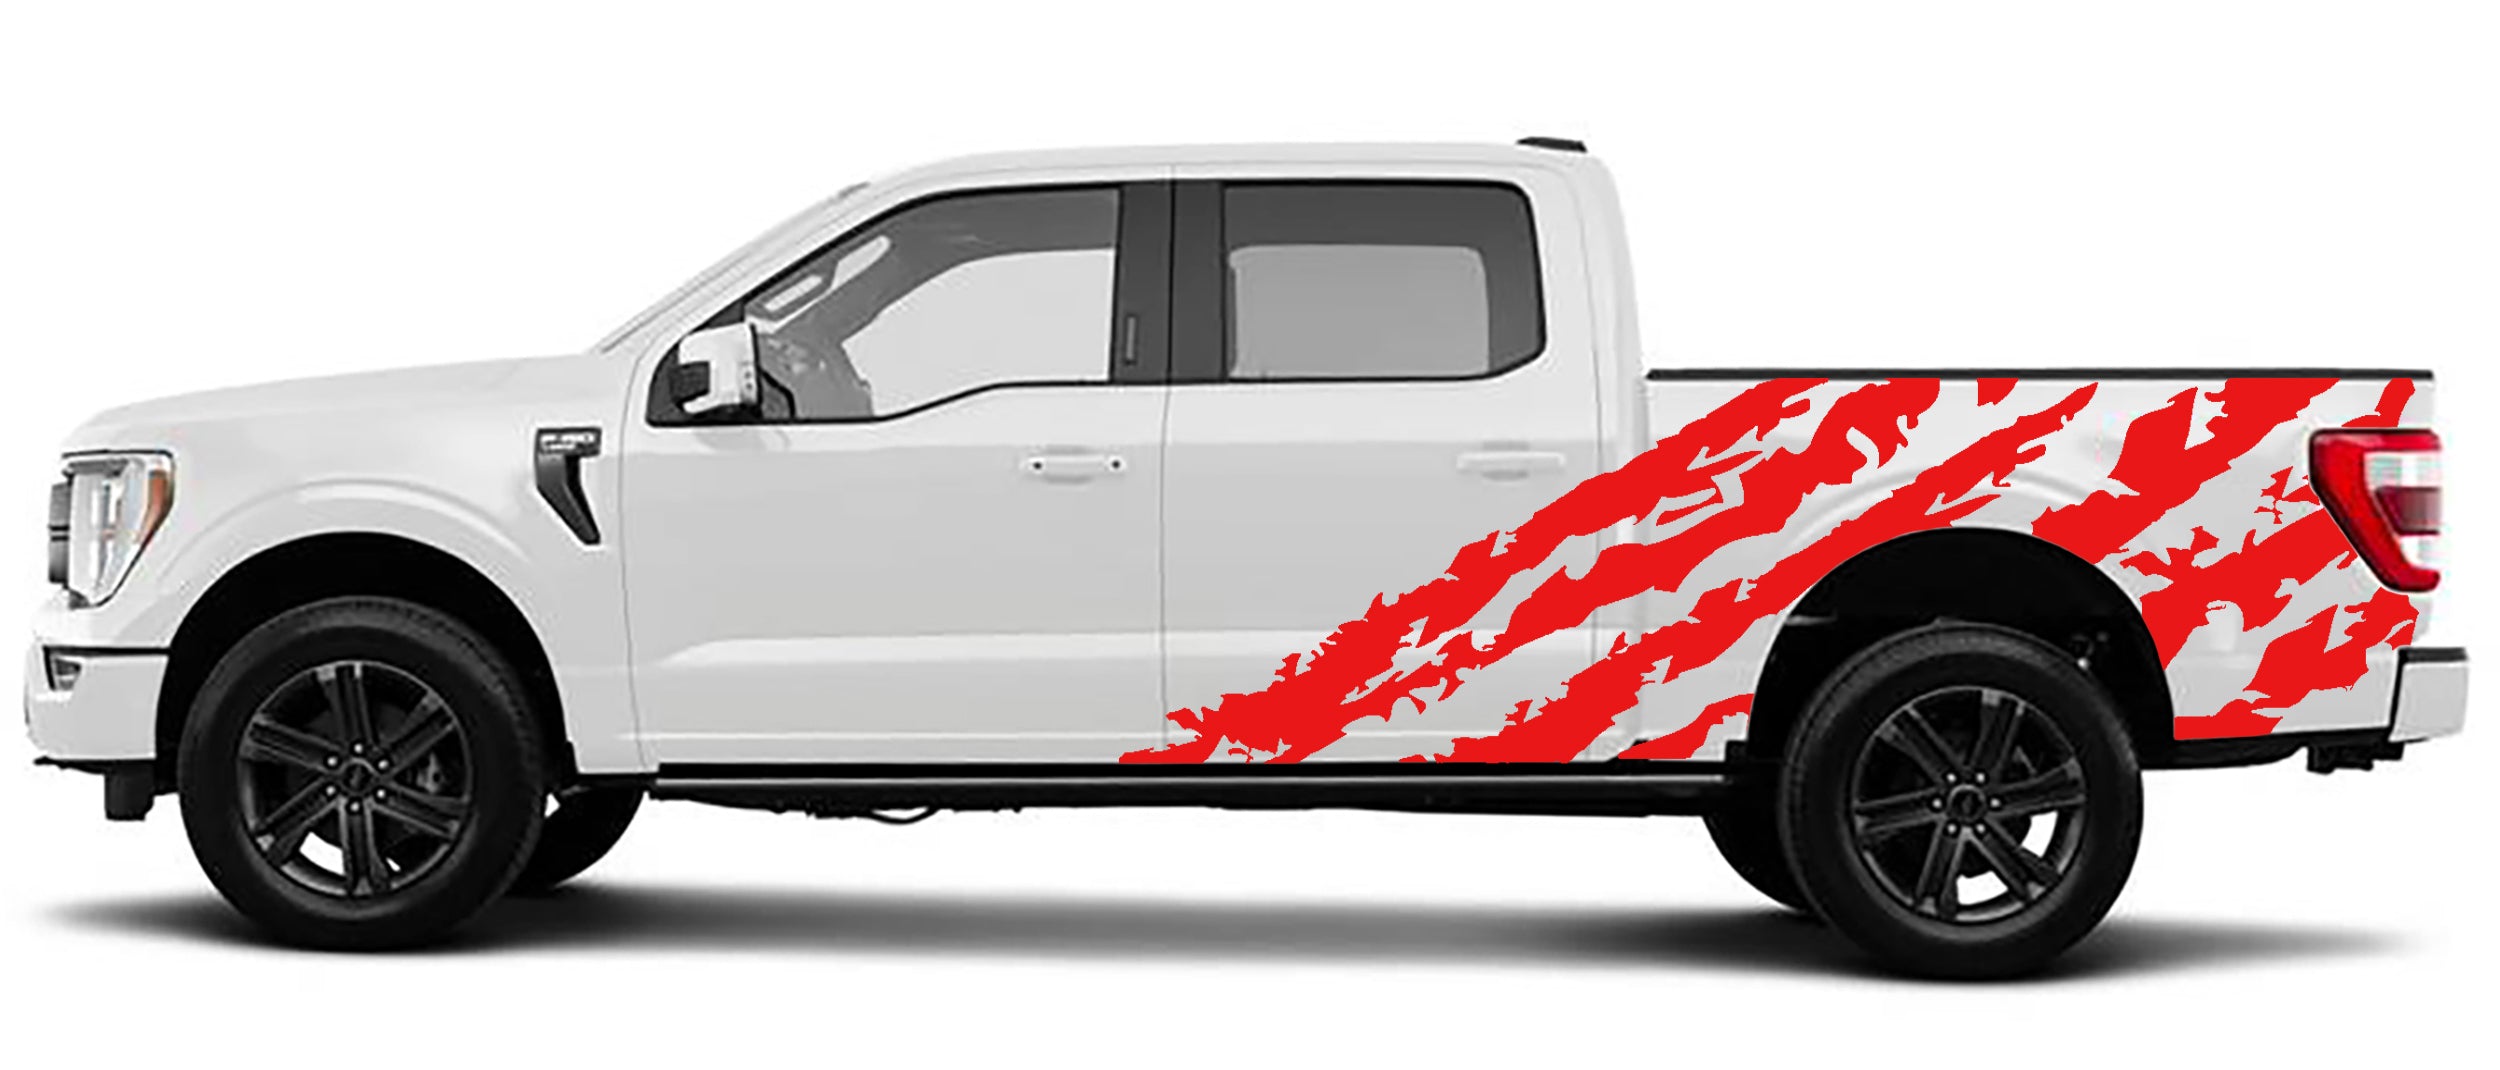 Ford F-150 Shred Side Decals (Pair) : Vinyl Graphics Kit Fits (2021-2023)